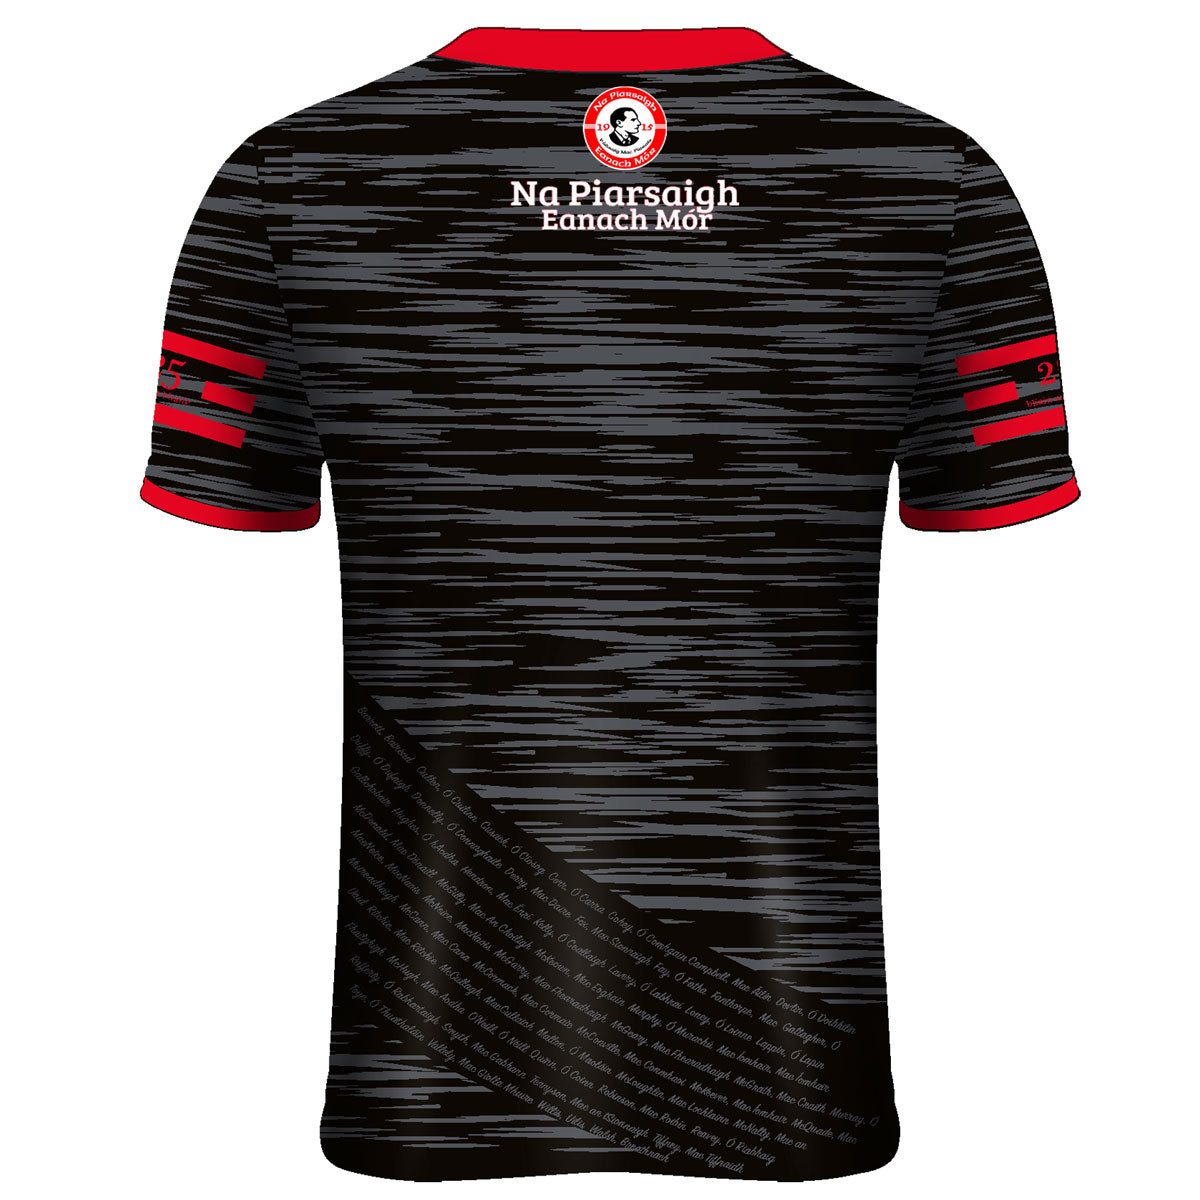 Mc Keever Na Piarsaigh Eanach Mor CLG Reserve Jersey - Womens - Grey/Red/Black